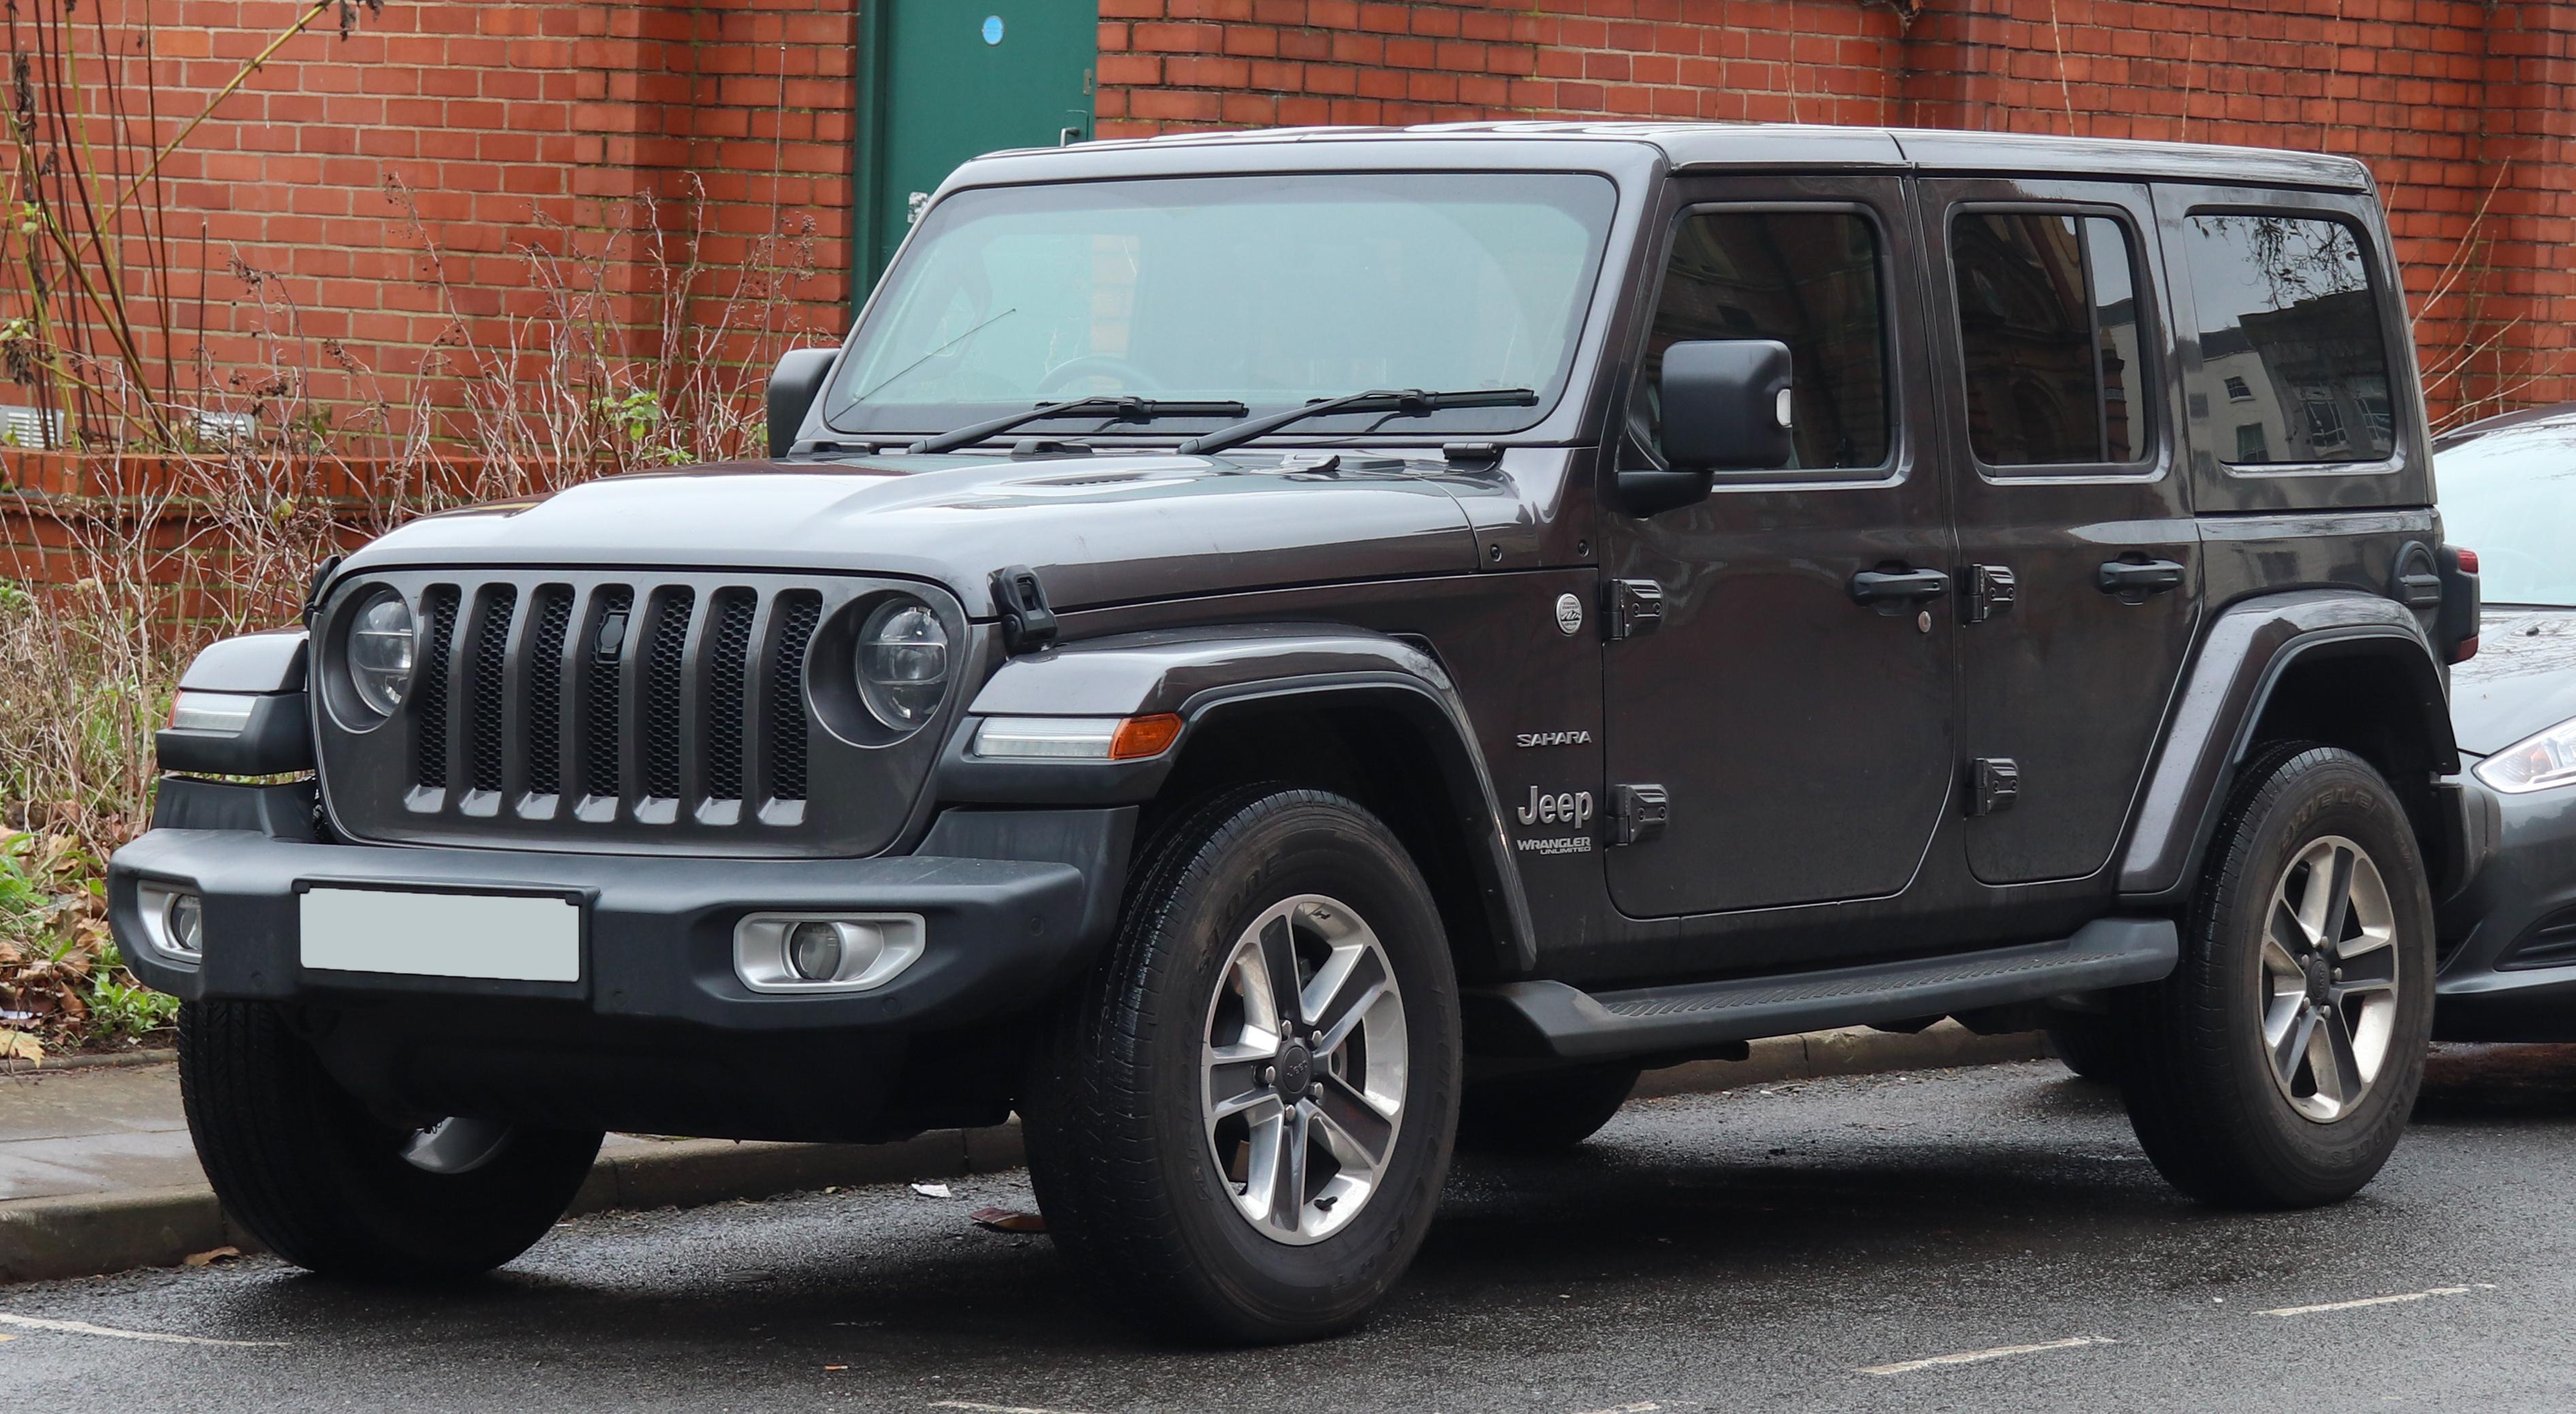 Factors⁤ that affect fuel efficiency in a Jeep Wrangler